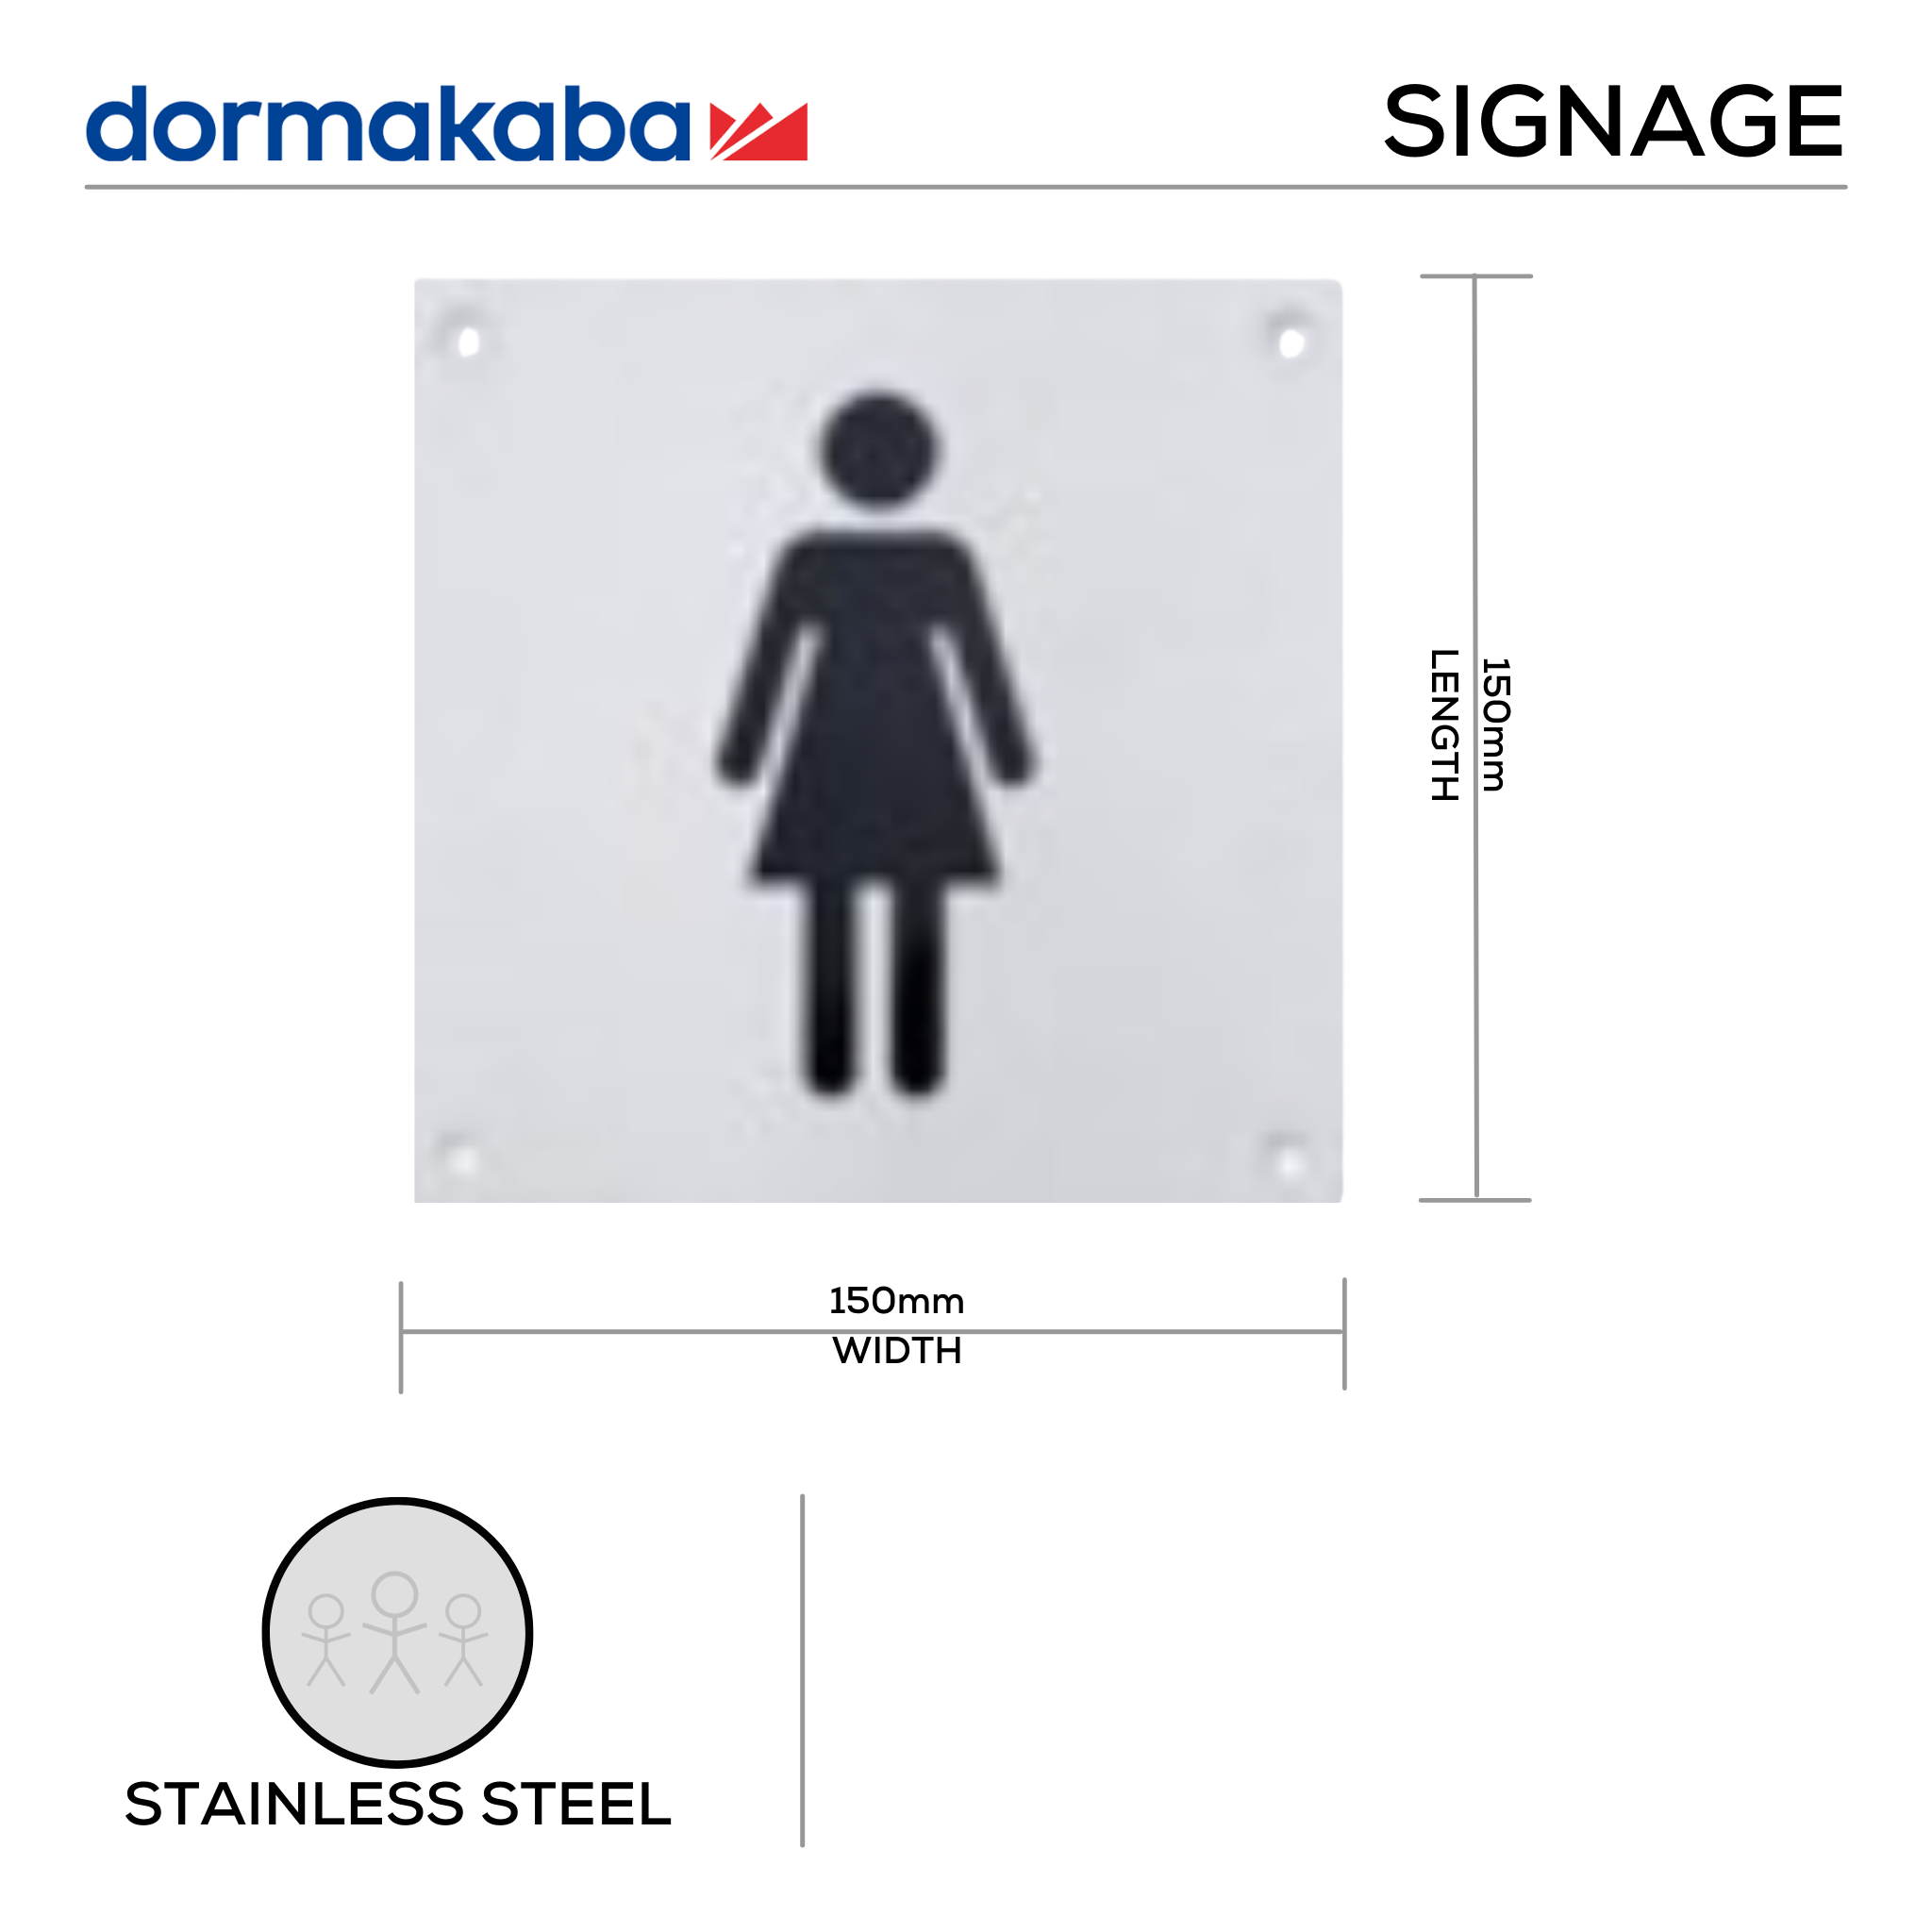 DSS-131, Door Signage, Female sign, 150mm (l), 150mm (w), 1,2mm (t), Stainless Steel, DORMAKABA